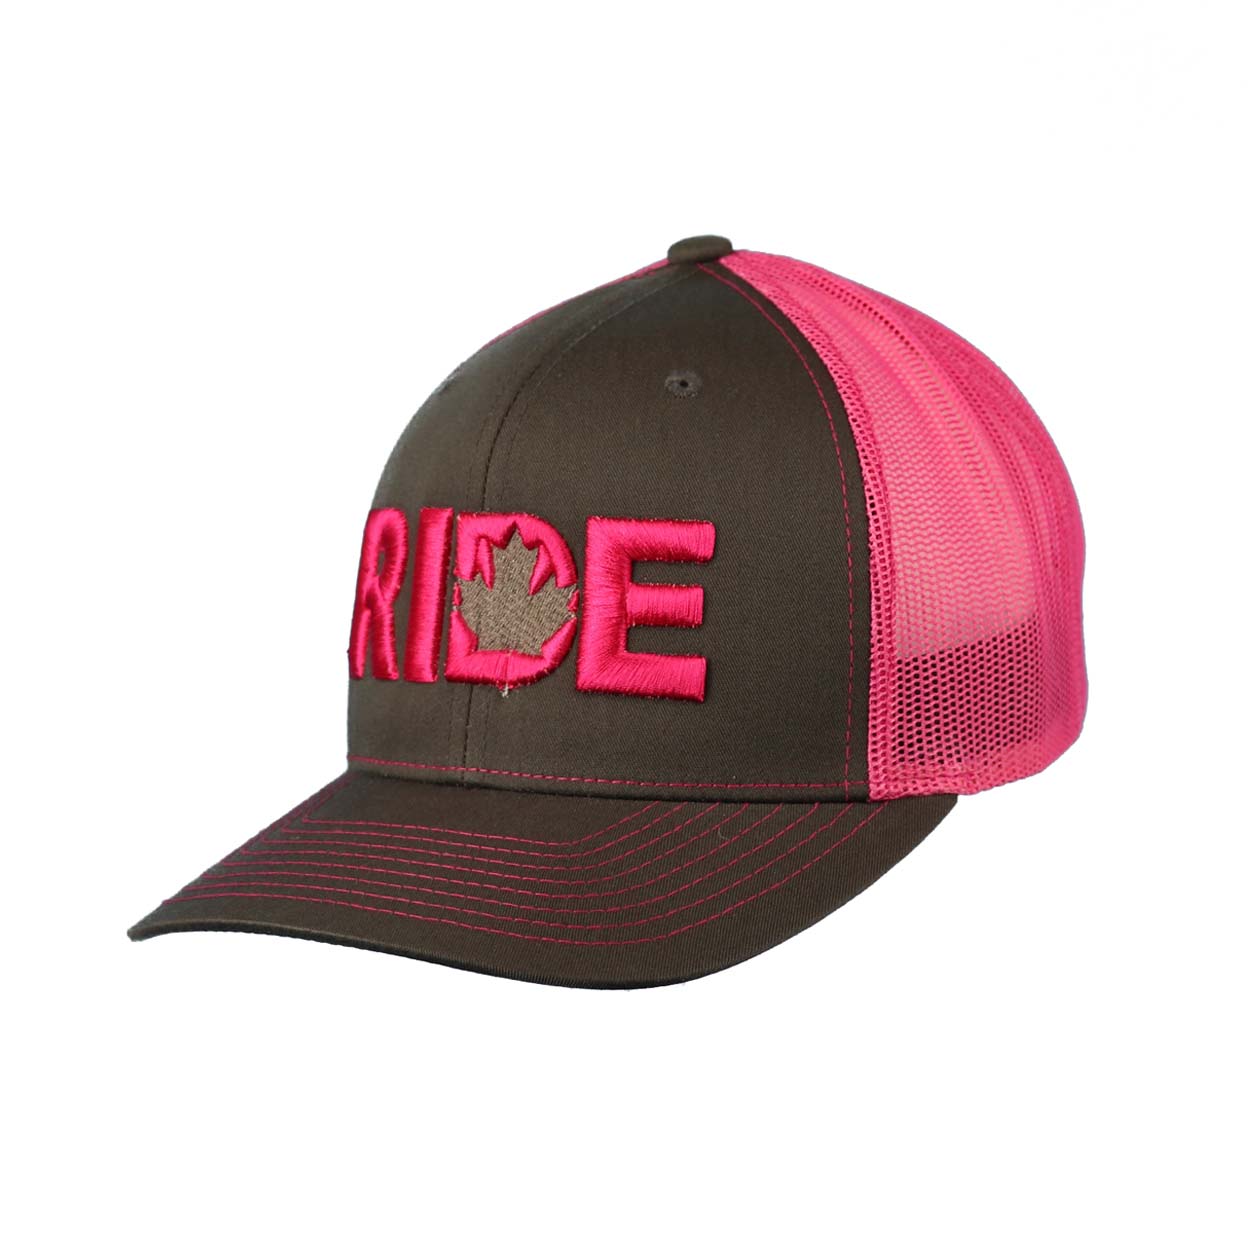 Ride Canada Classic Embroidered Snapback Trucker Hat Gray/Pink